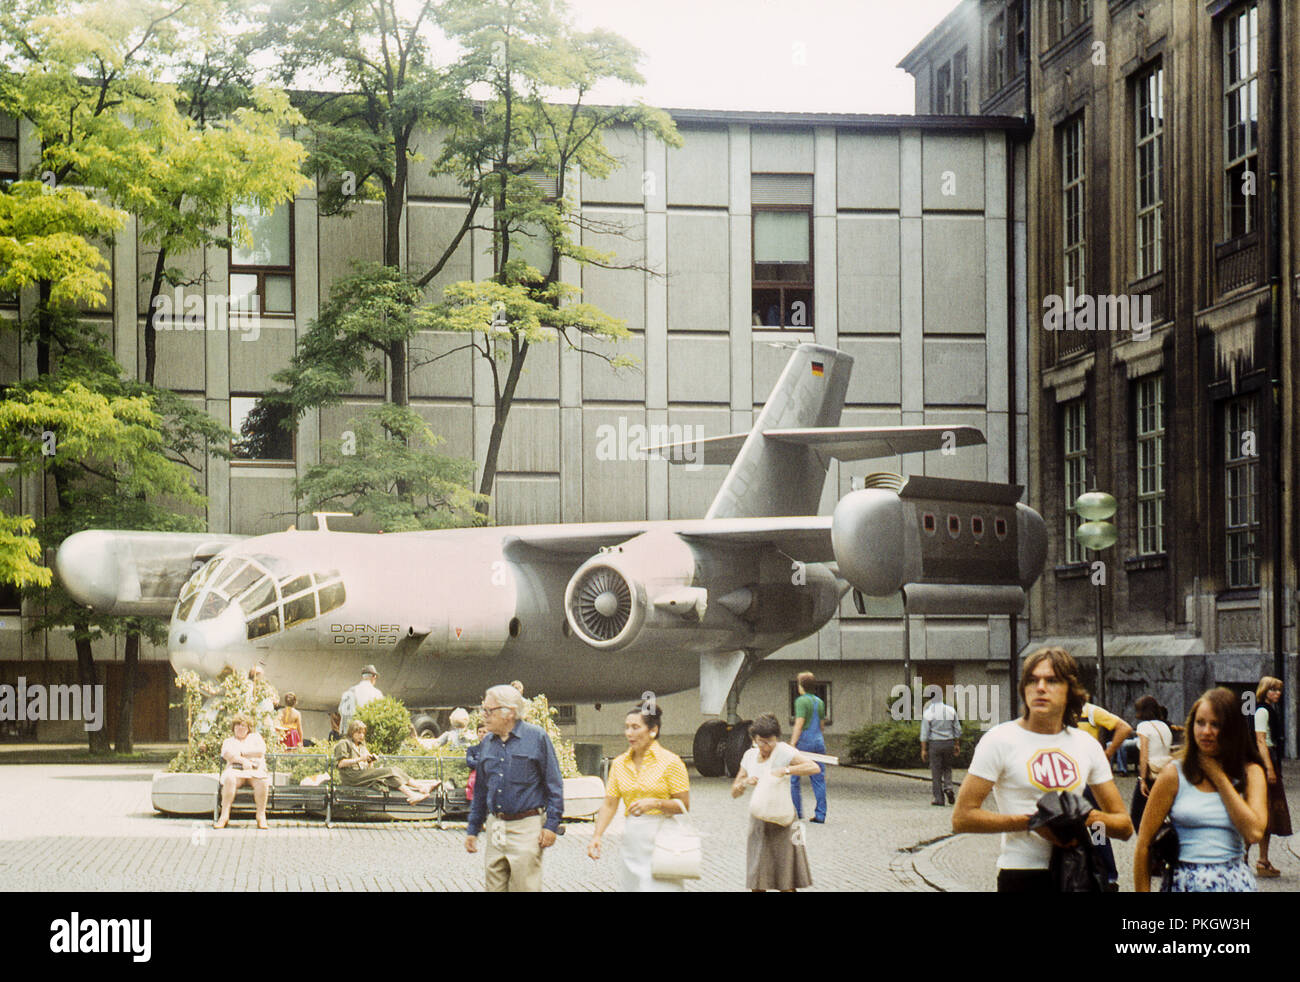 The Courtyard of the Deutsches Museum, Munich, Germany in 1979. The plane which can be seen is the Dornier Do 31 E3. Stock Photo